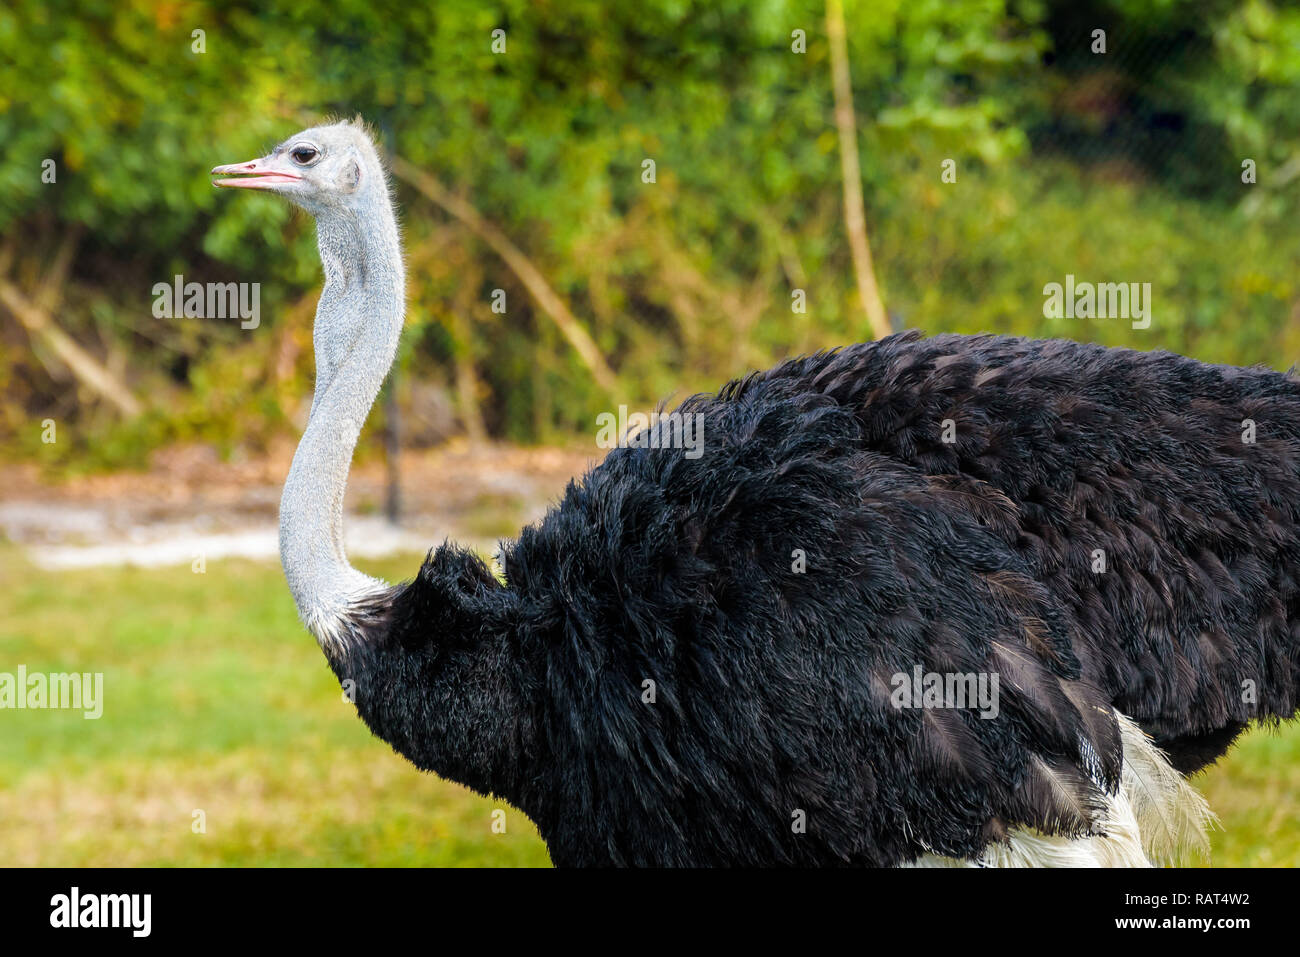 Portrait of common ostrich (Struthio camelus),species of large flightless bird native to Africa on a green background Stock Photo